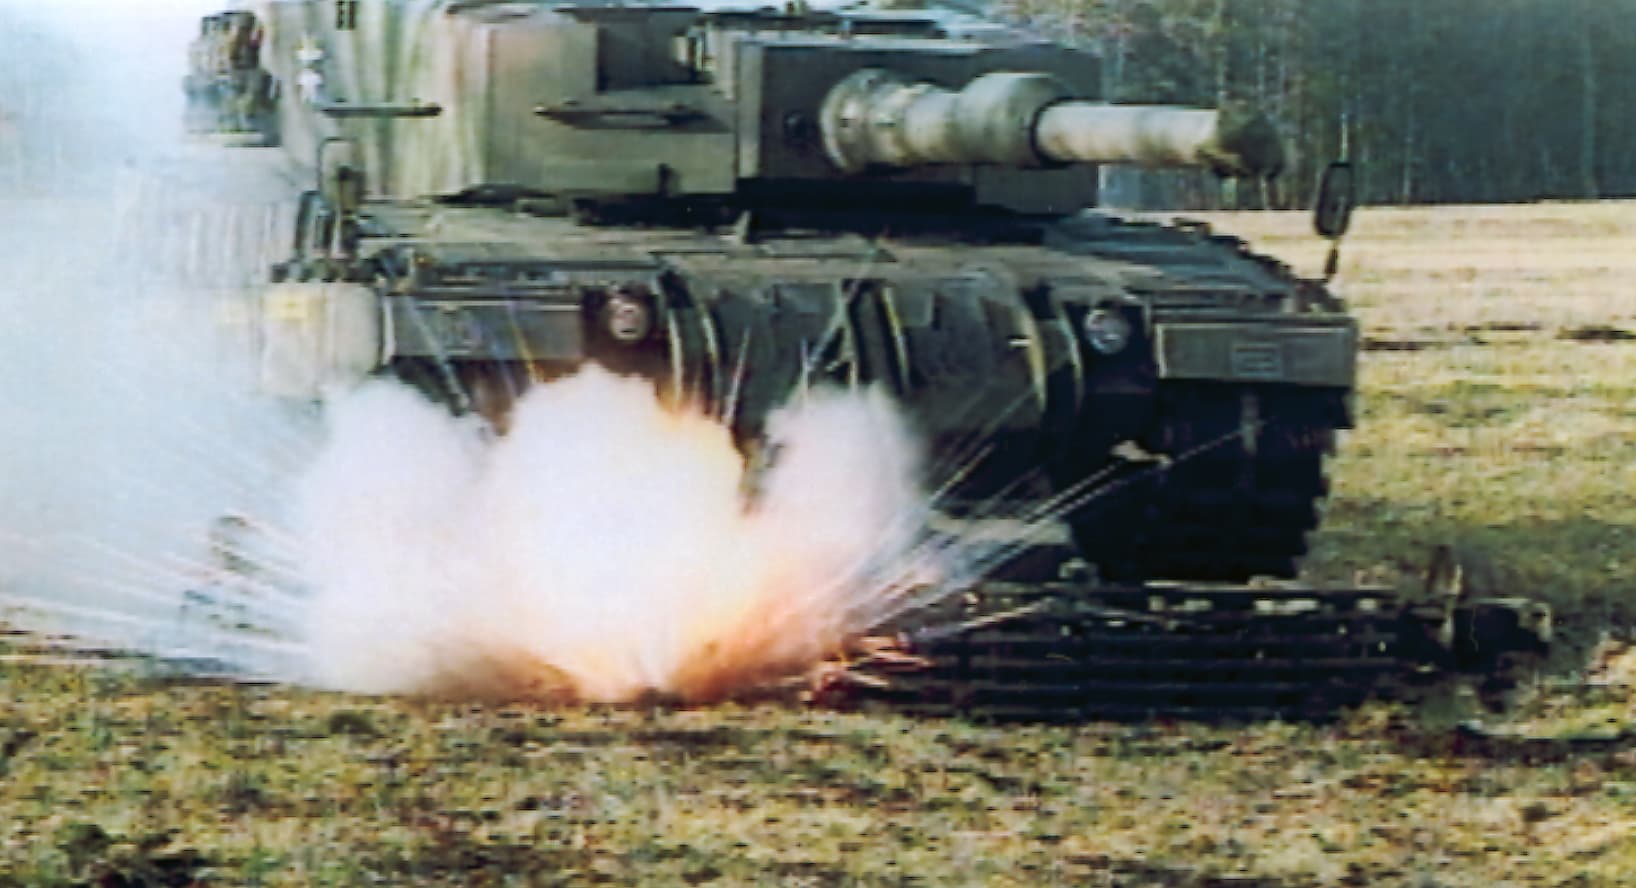 Tank during gating attempt 